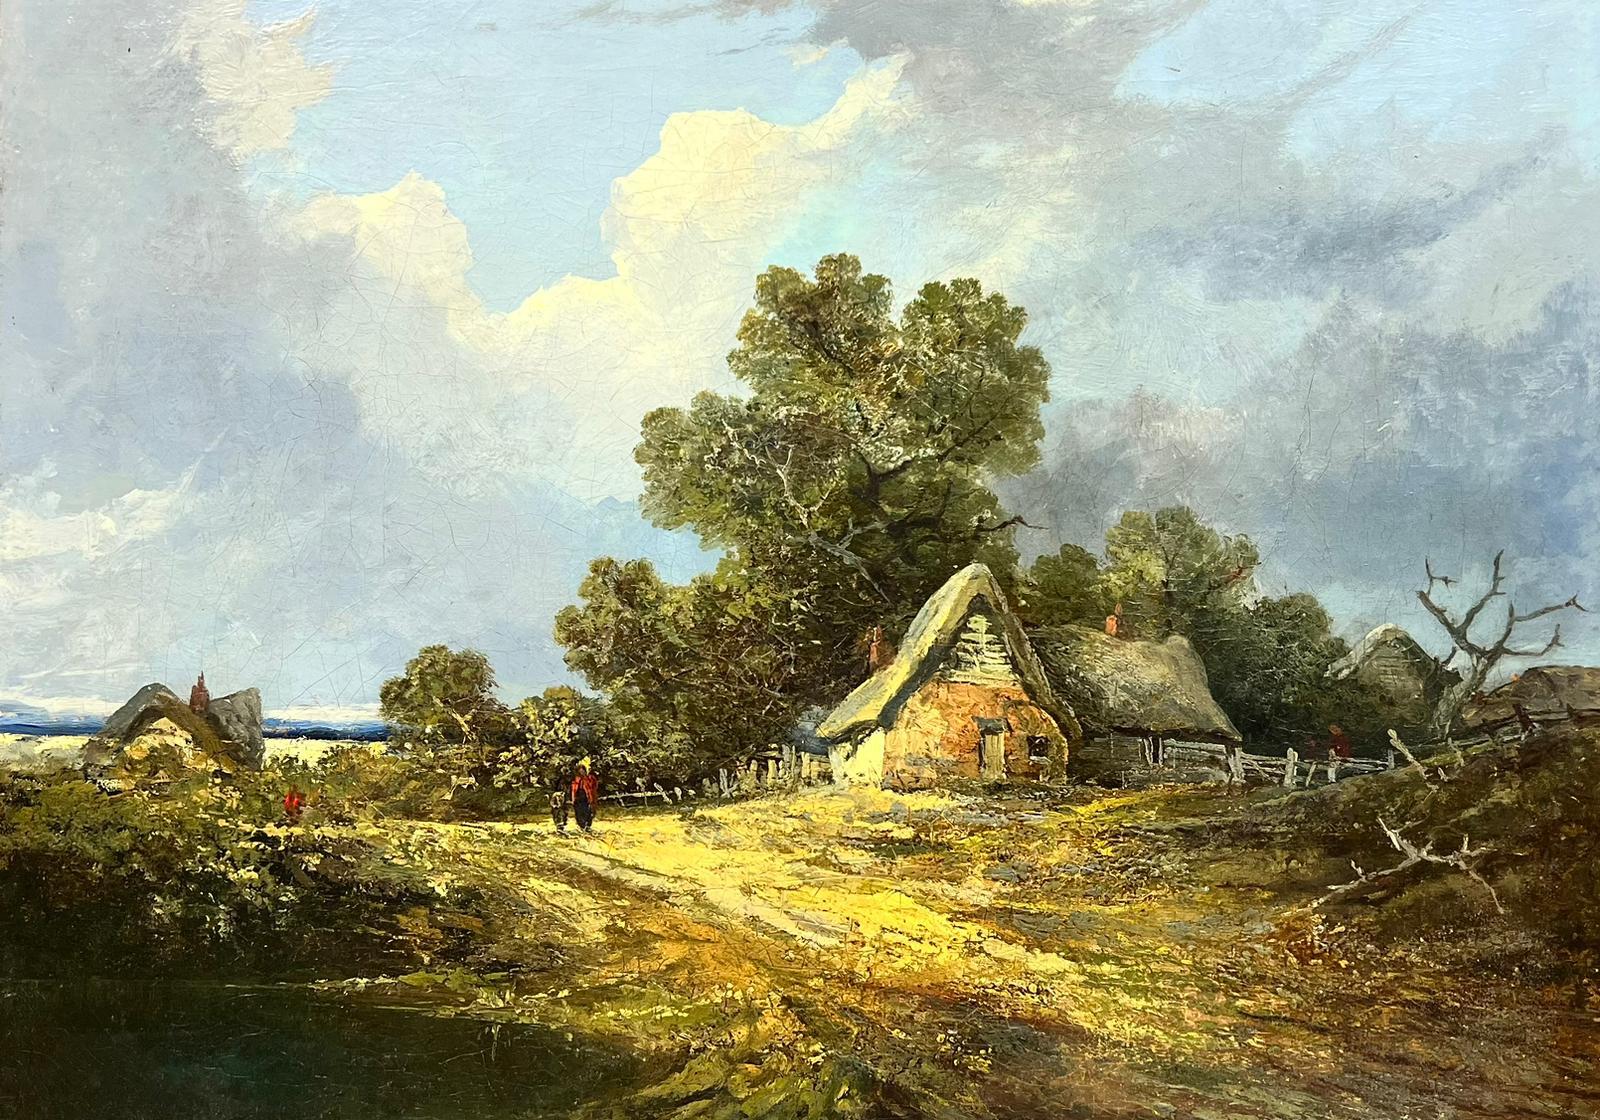 Artist/ School: Norwich School, circa 1876

Title: 'Norfolk Clay Lump and Thatched Cottages'. 

Medium: oil on canvas, framed

Framed: 24 x 31 inches
Painting: 19 x 26 inches

Provenance: private collection, East Anglia, England

Condition: The